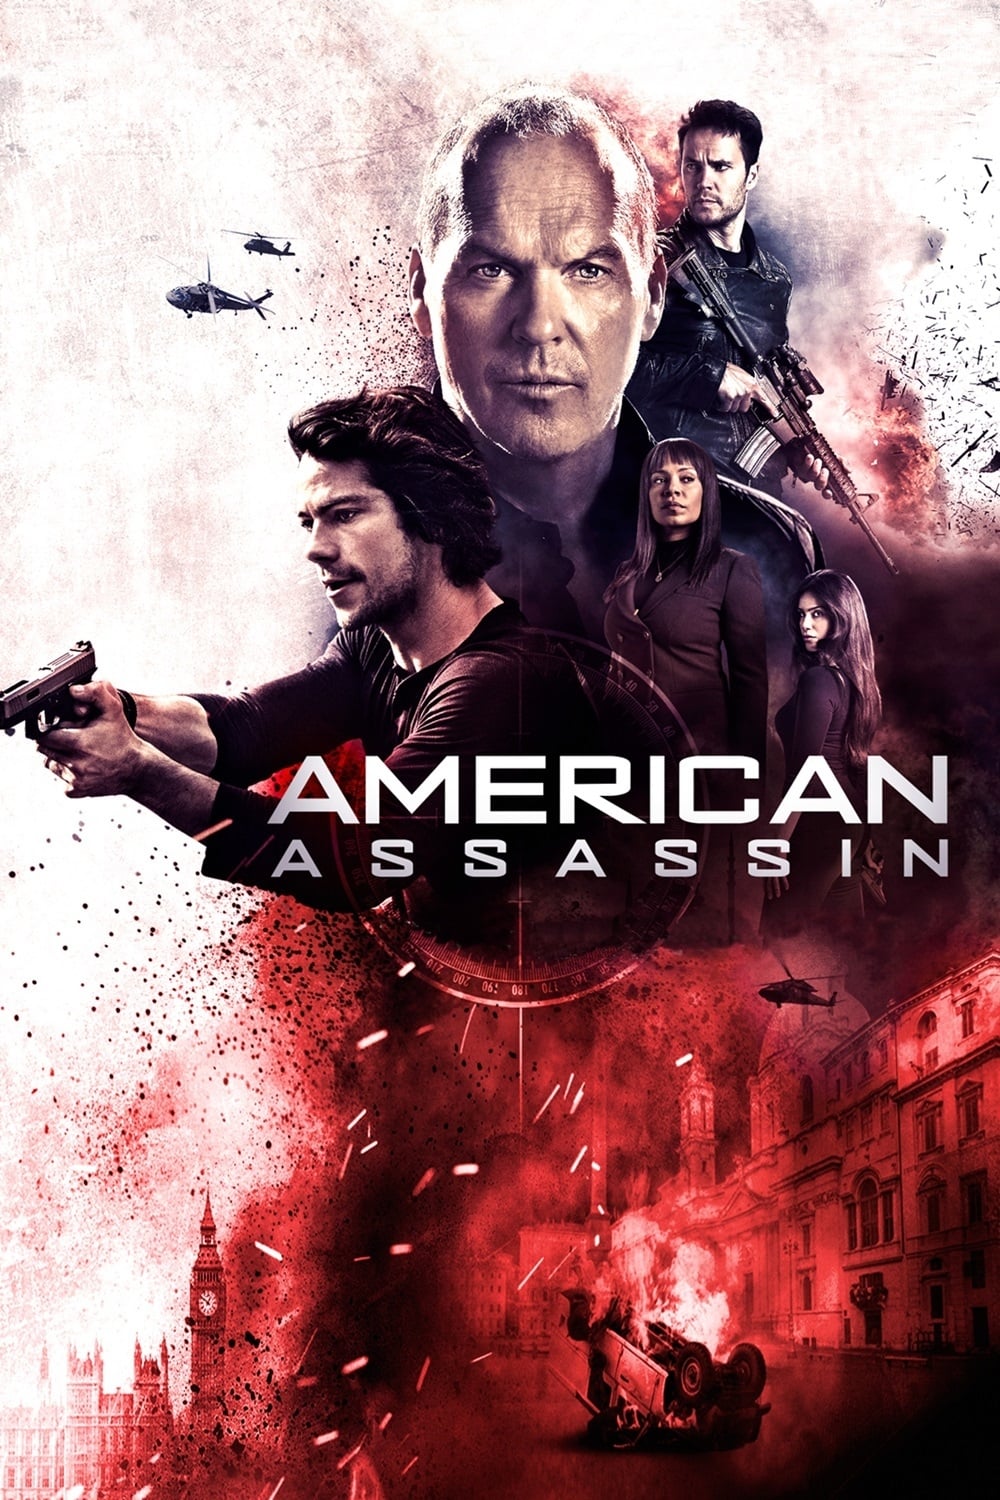 in the arms of an assassin full movie free download